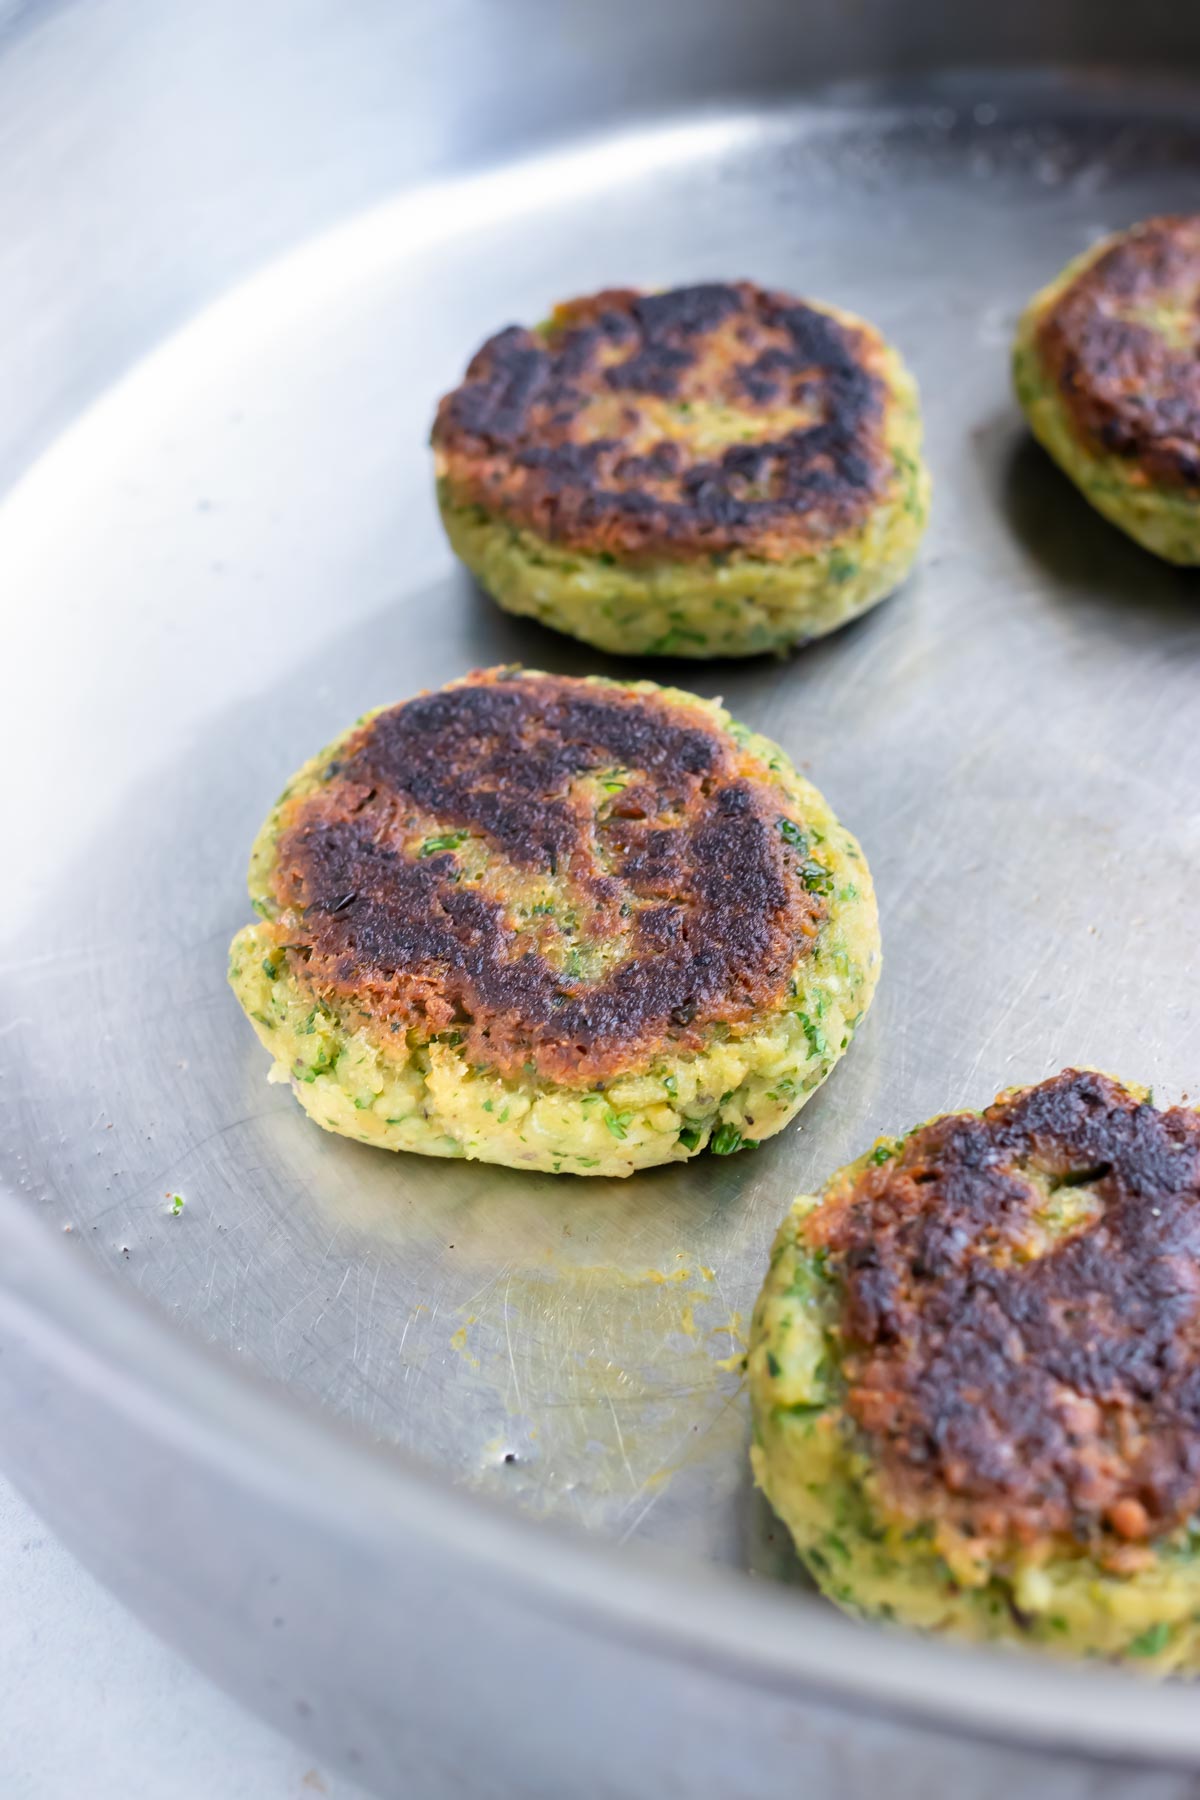 Cook this healthy and easy falafel recipe in a skillet on the stove for a Mediterranean dish.